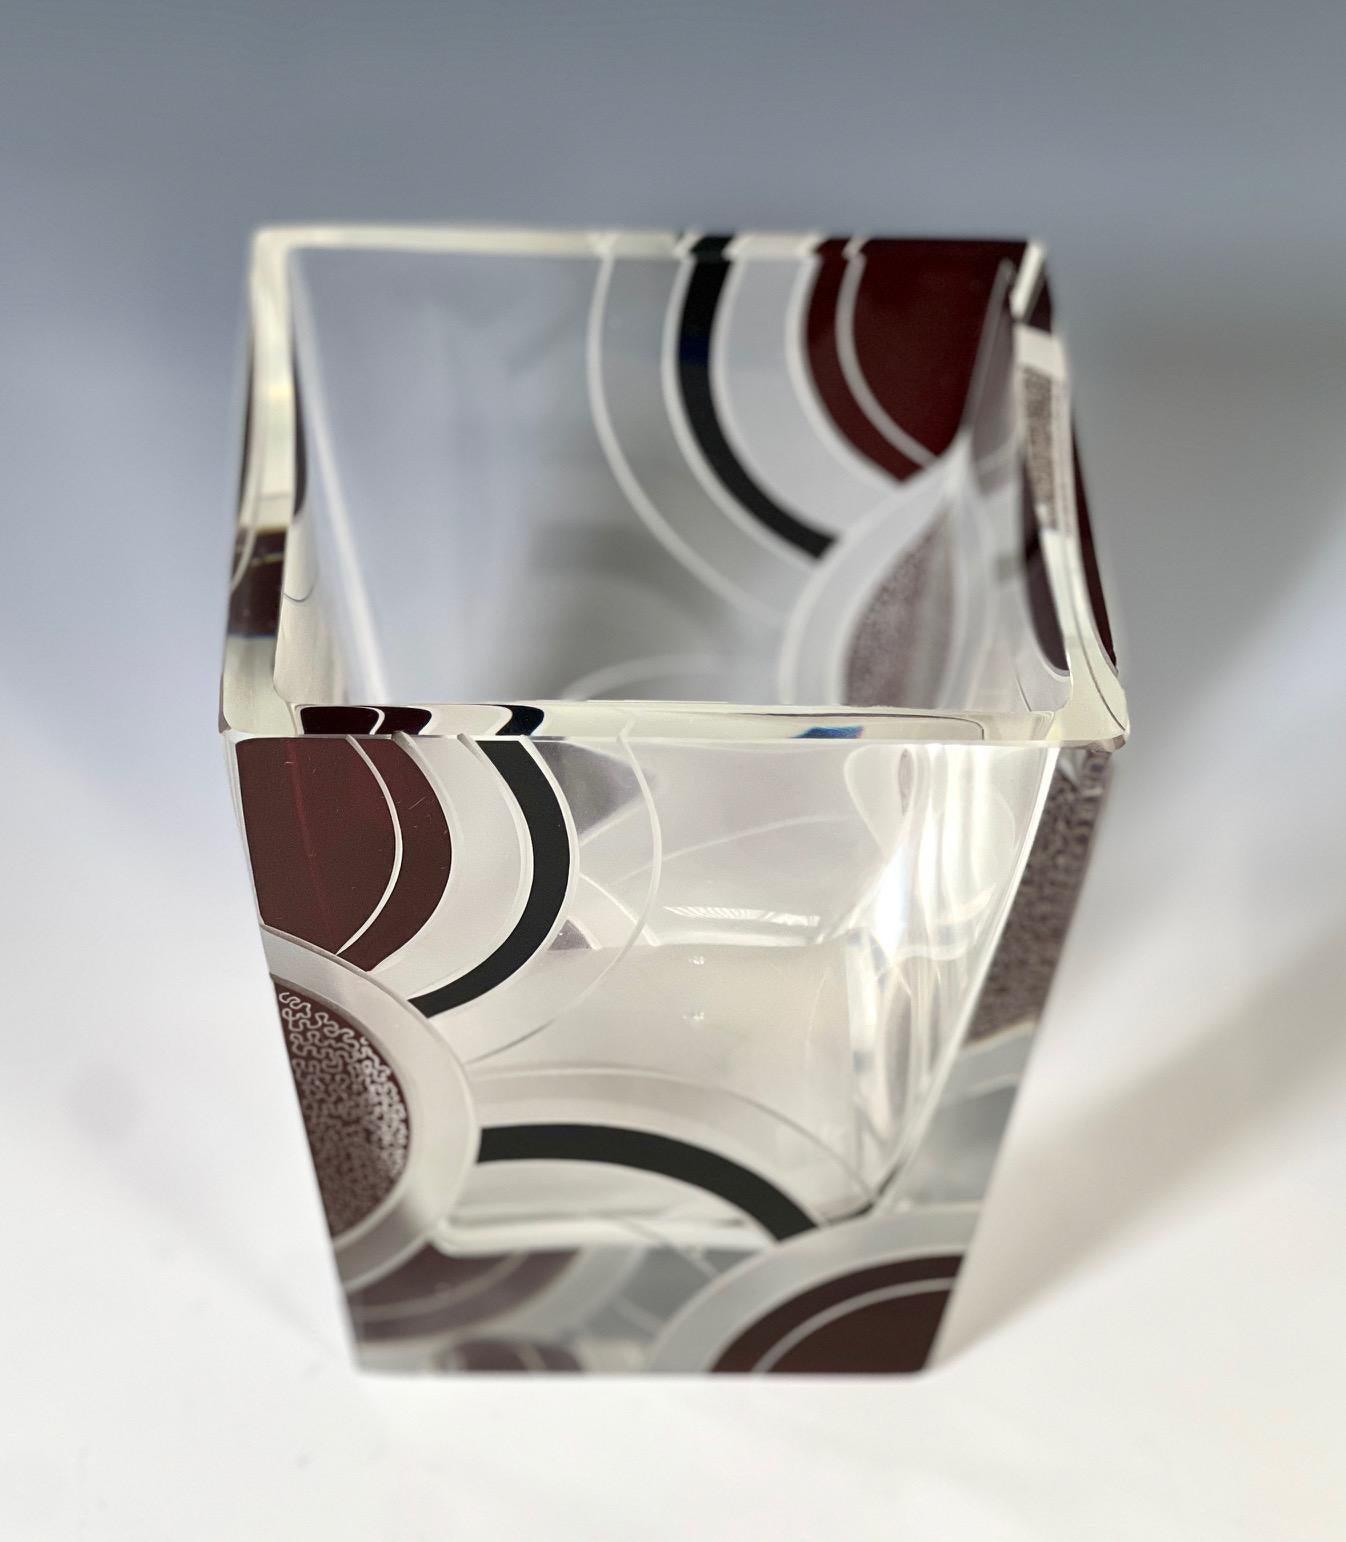 Please see the other options listed to see the variety available of Art Deco vases, in rare and interesting forms, patterns and colors. Used singly or in groupings, these make a bold and dramatic statement. Designed by Karl Palda, these were popular